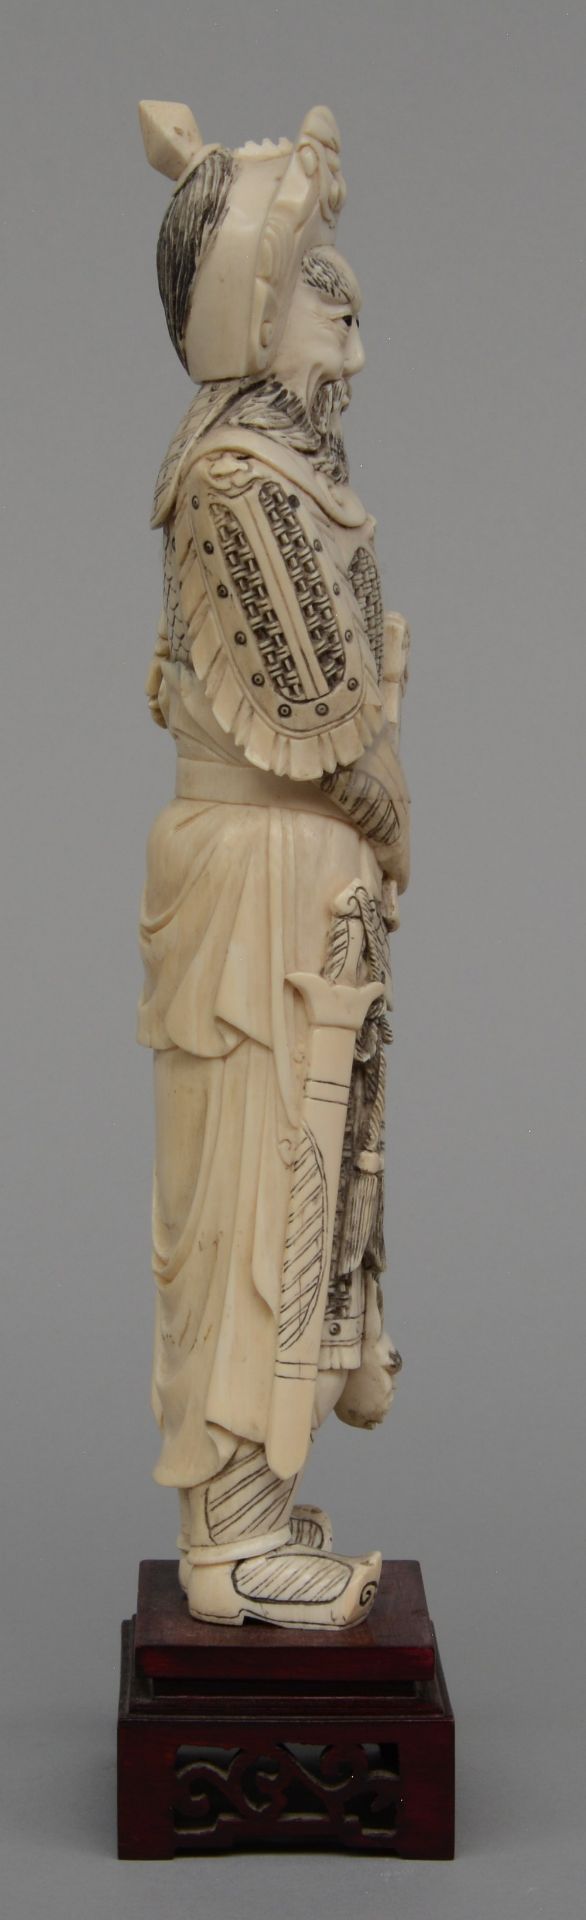 A Chinese ivory carved warrior on a wooden base, ca. 1900, H 35 cm - Image 4 of 6